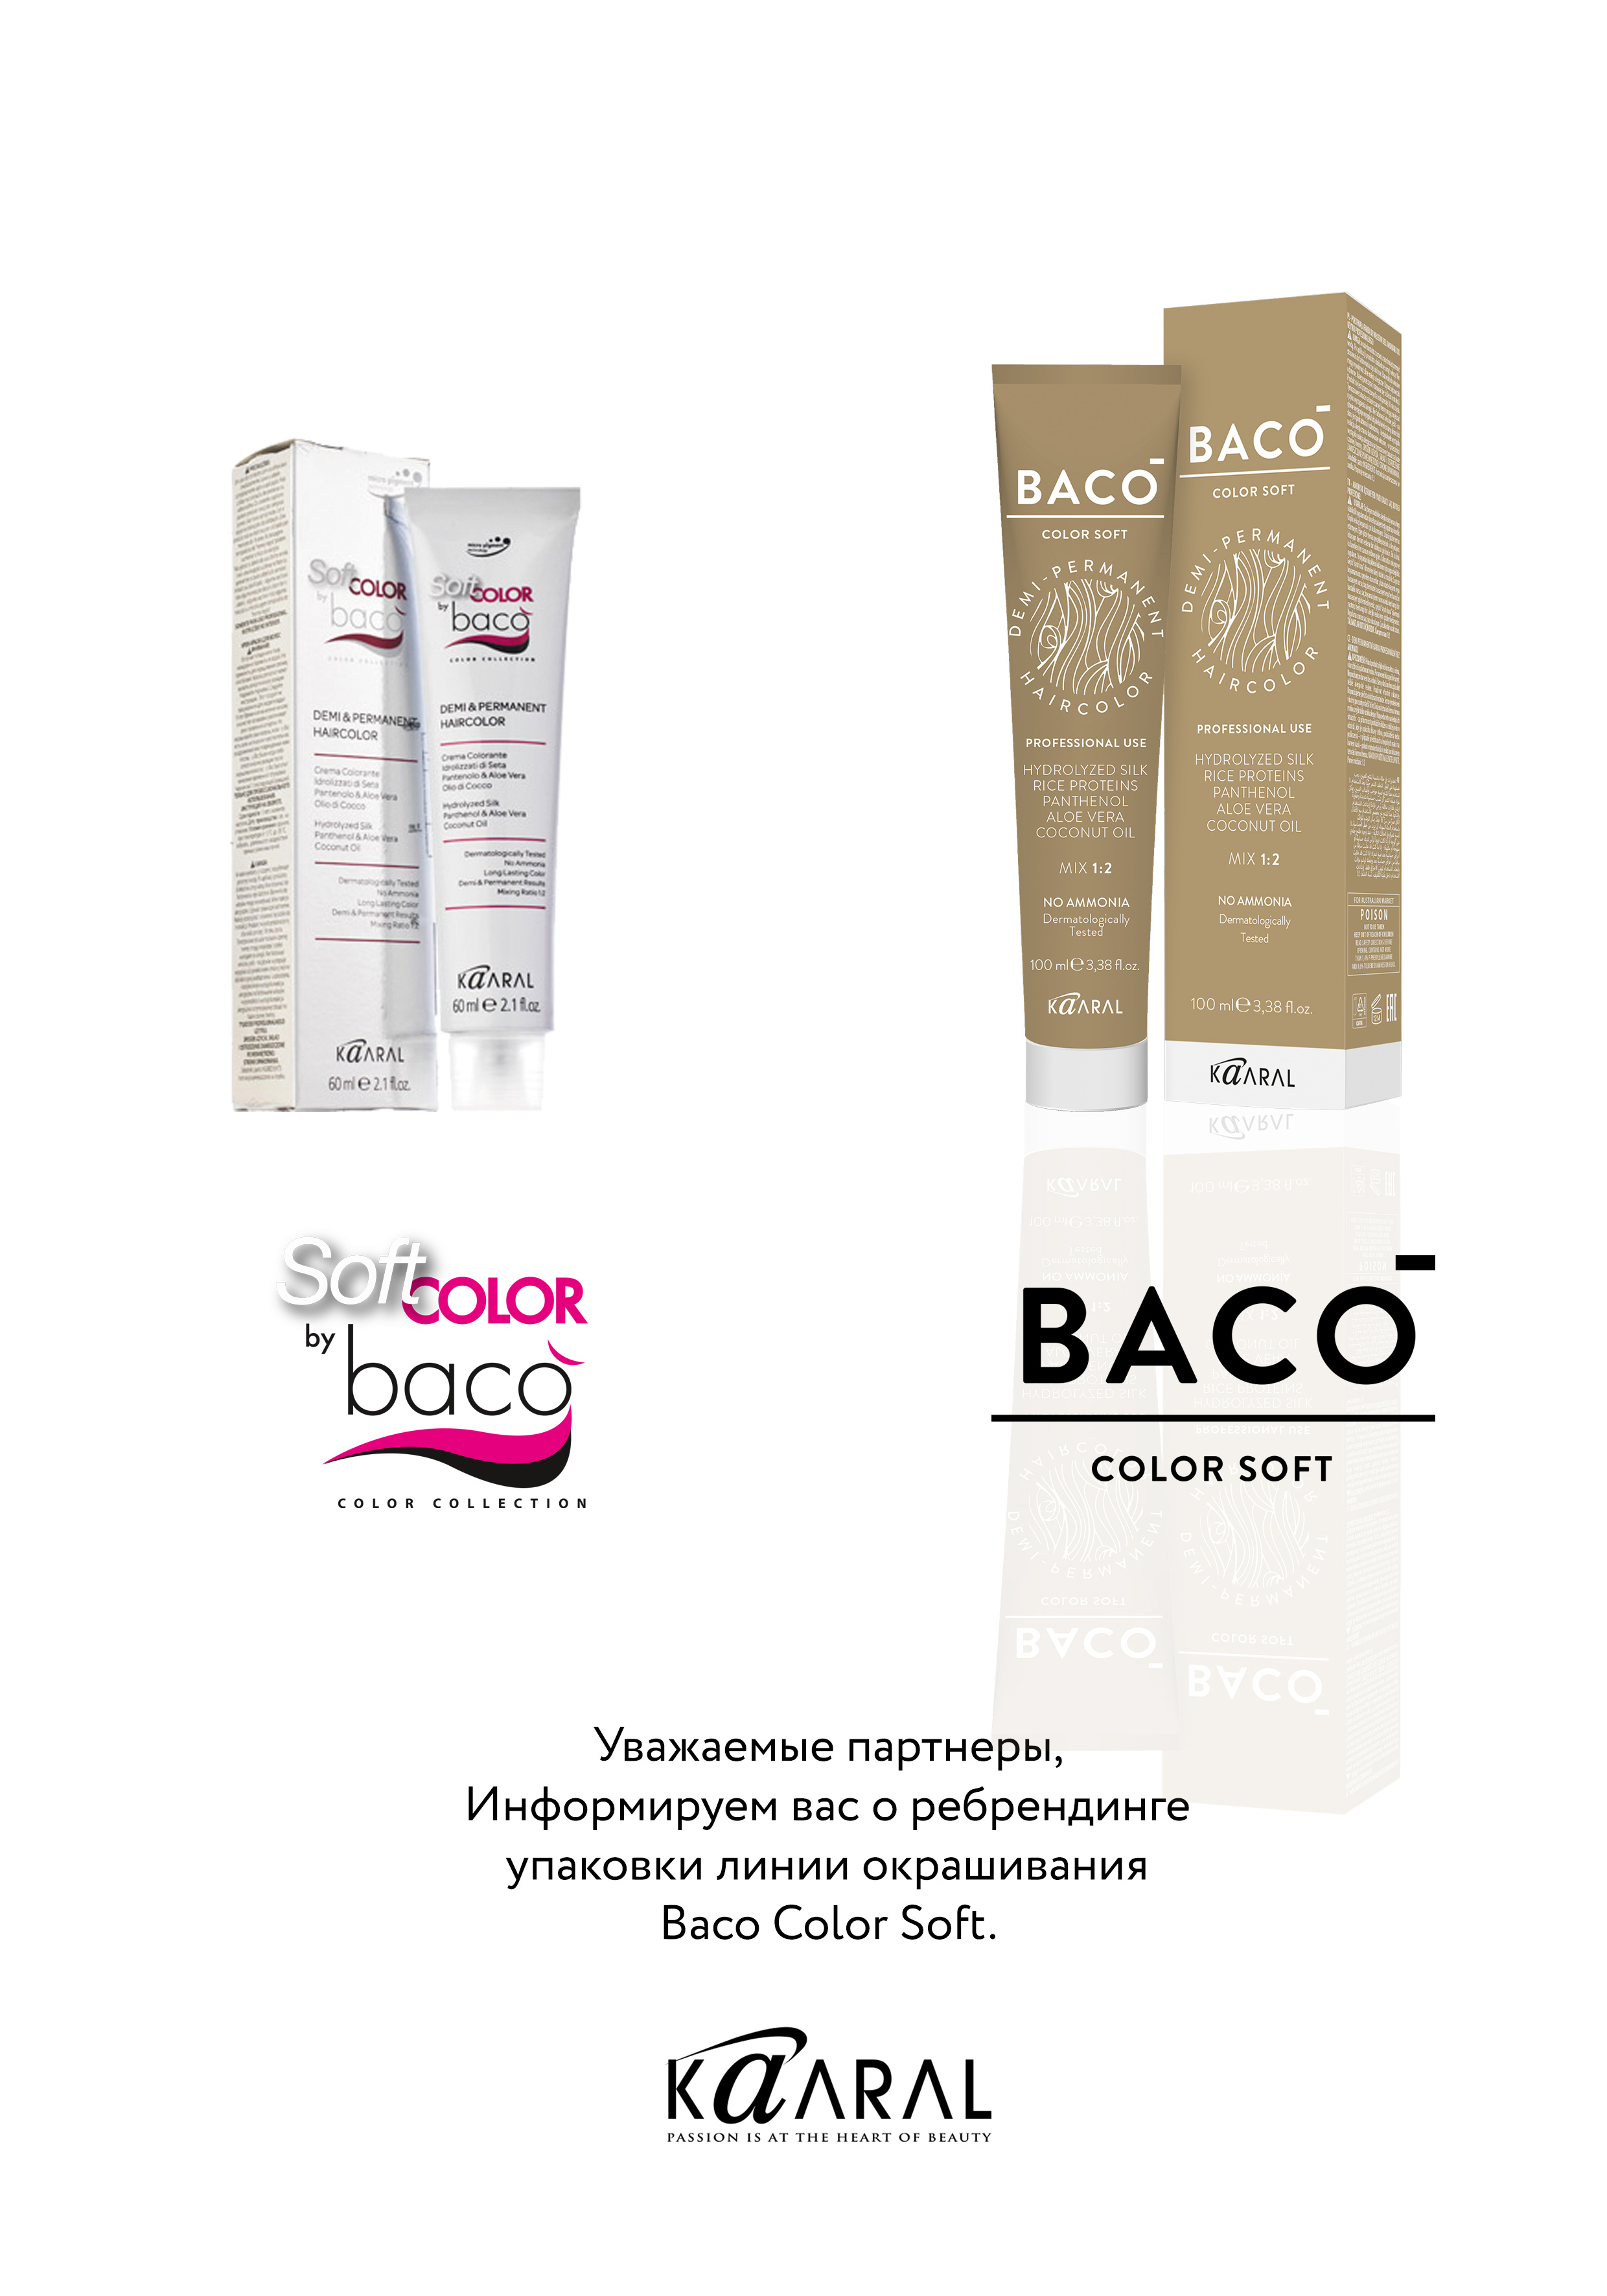 Baco-ColorSoft_old-new